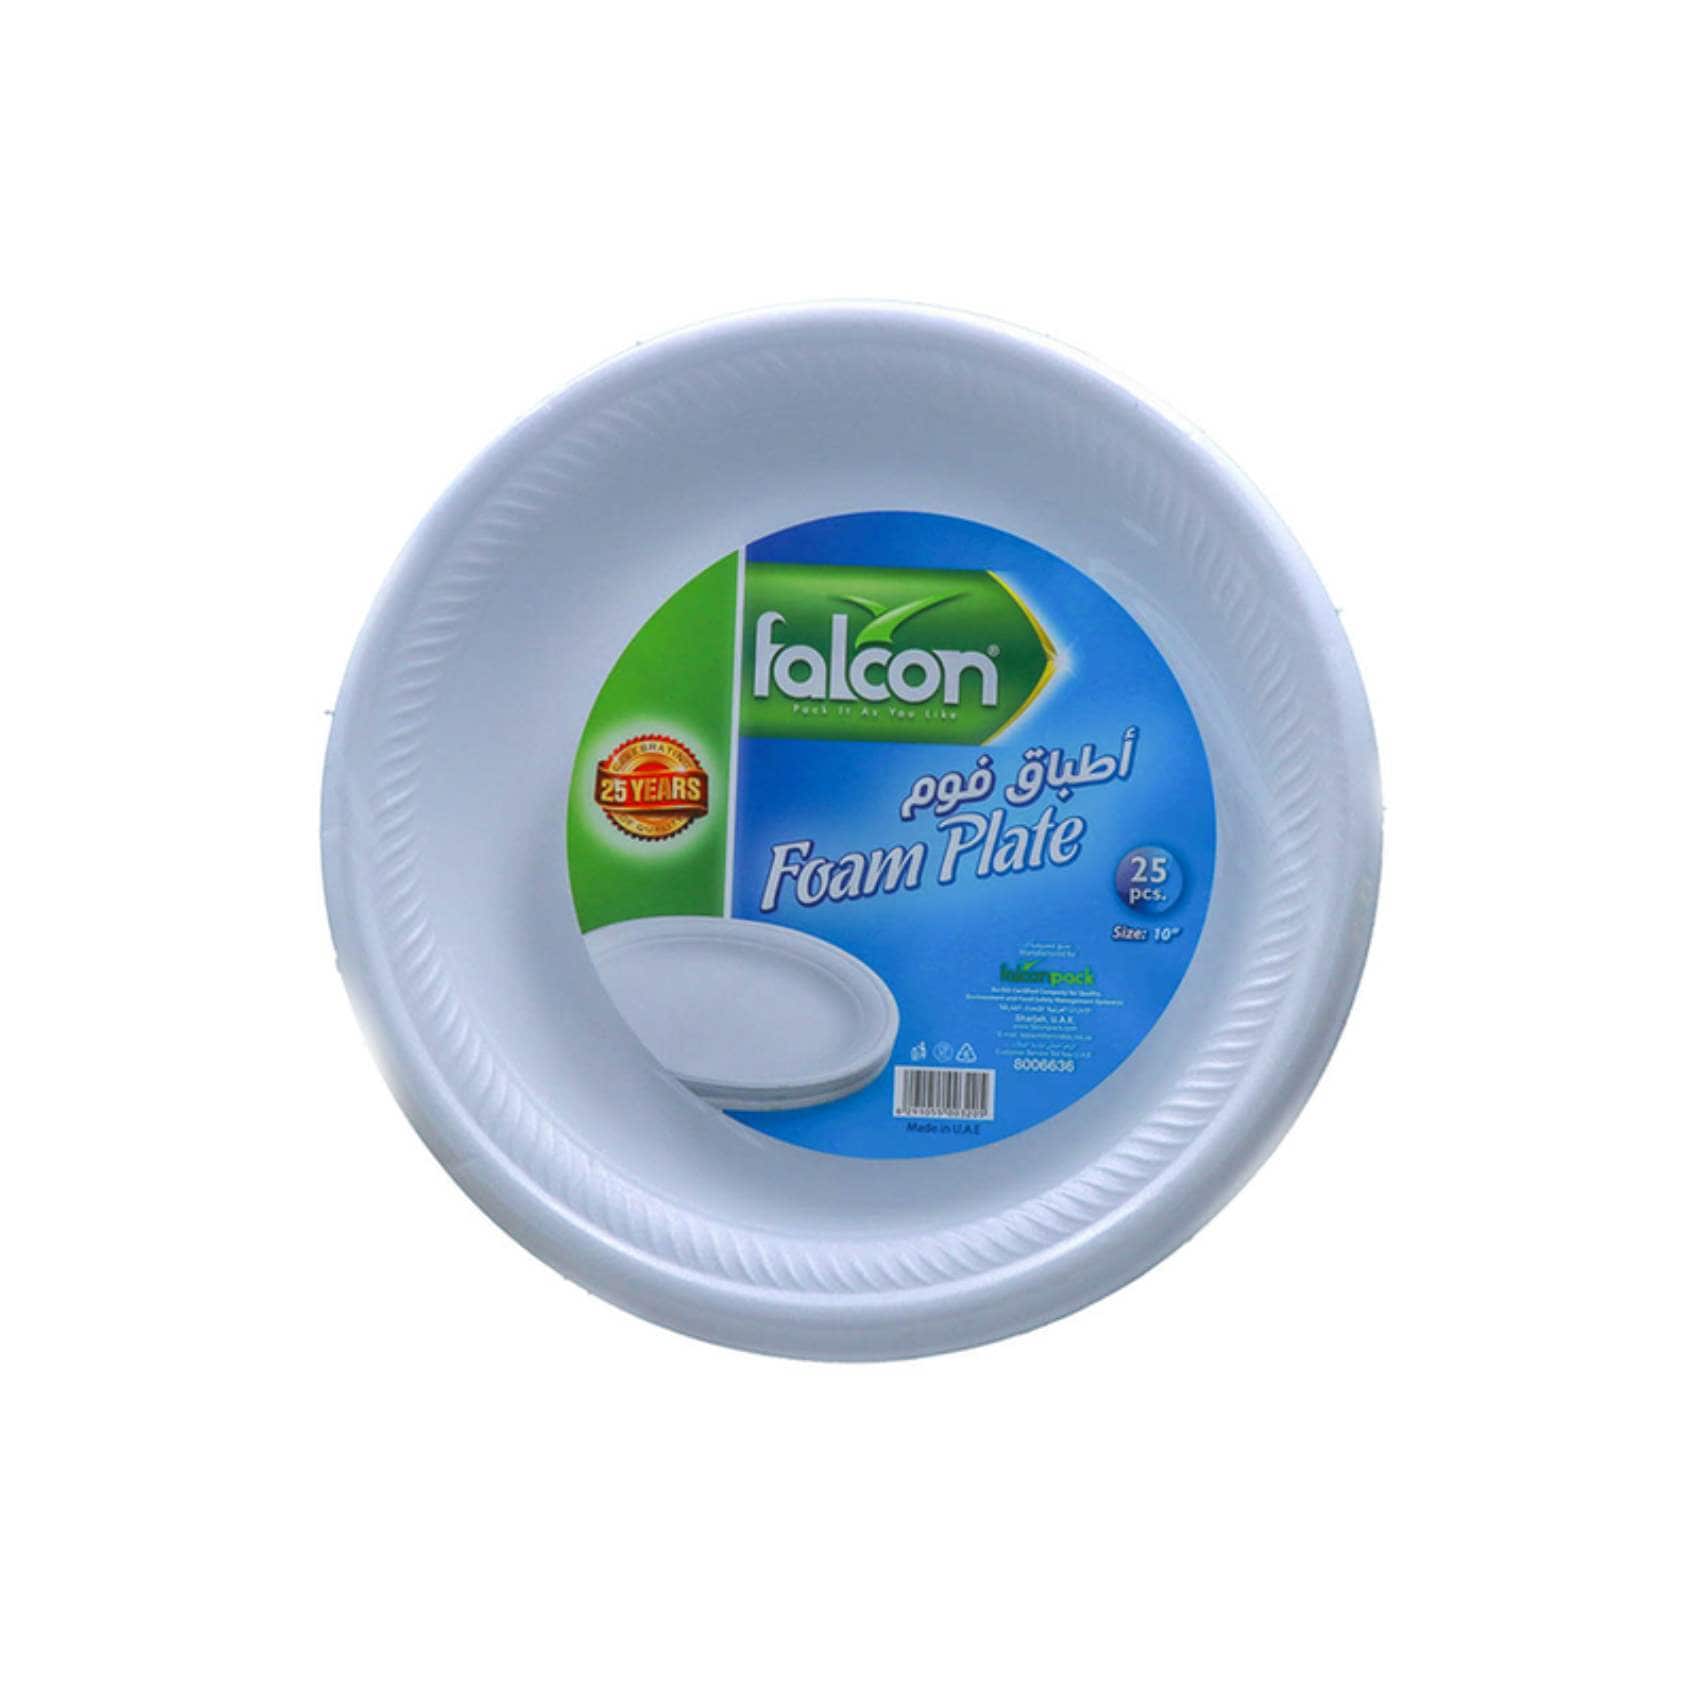 RETAIL-MFMRT013 Foam Plate 10 Inch (1 Pack x 25 Pieces) – Falcon Pack Online